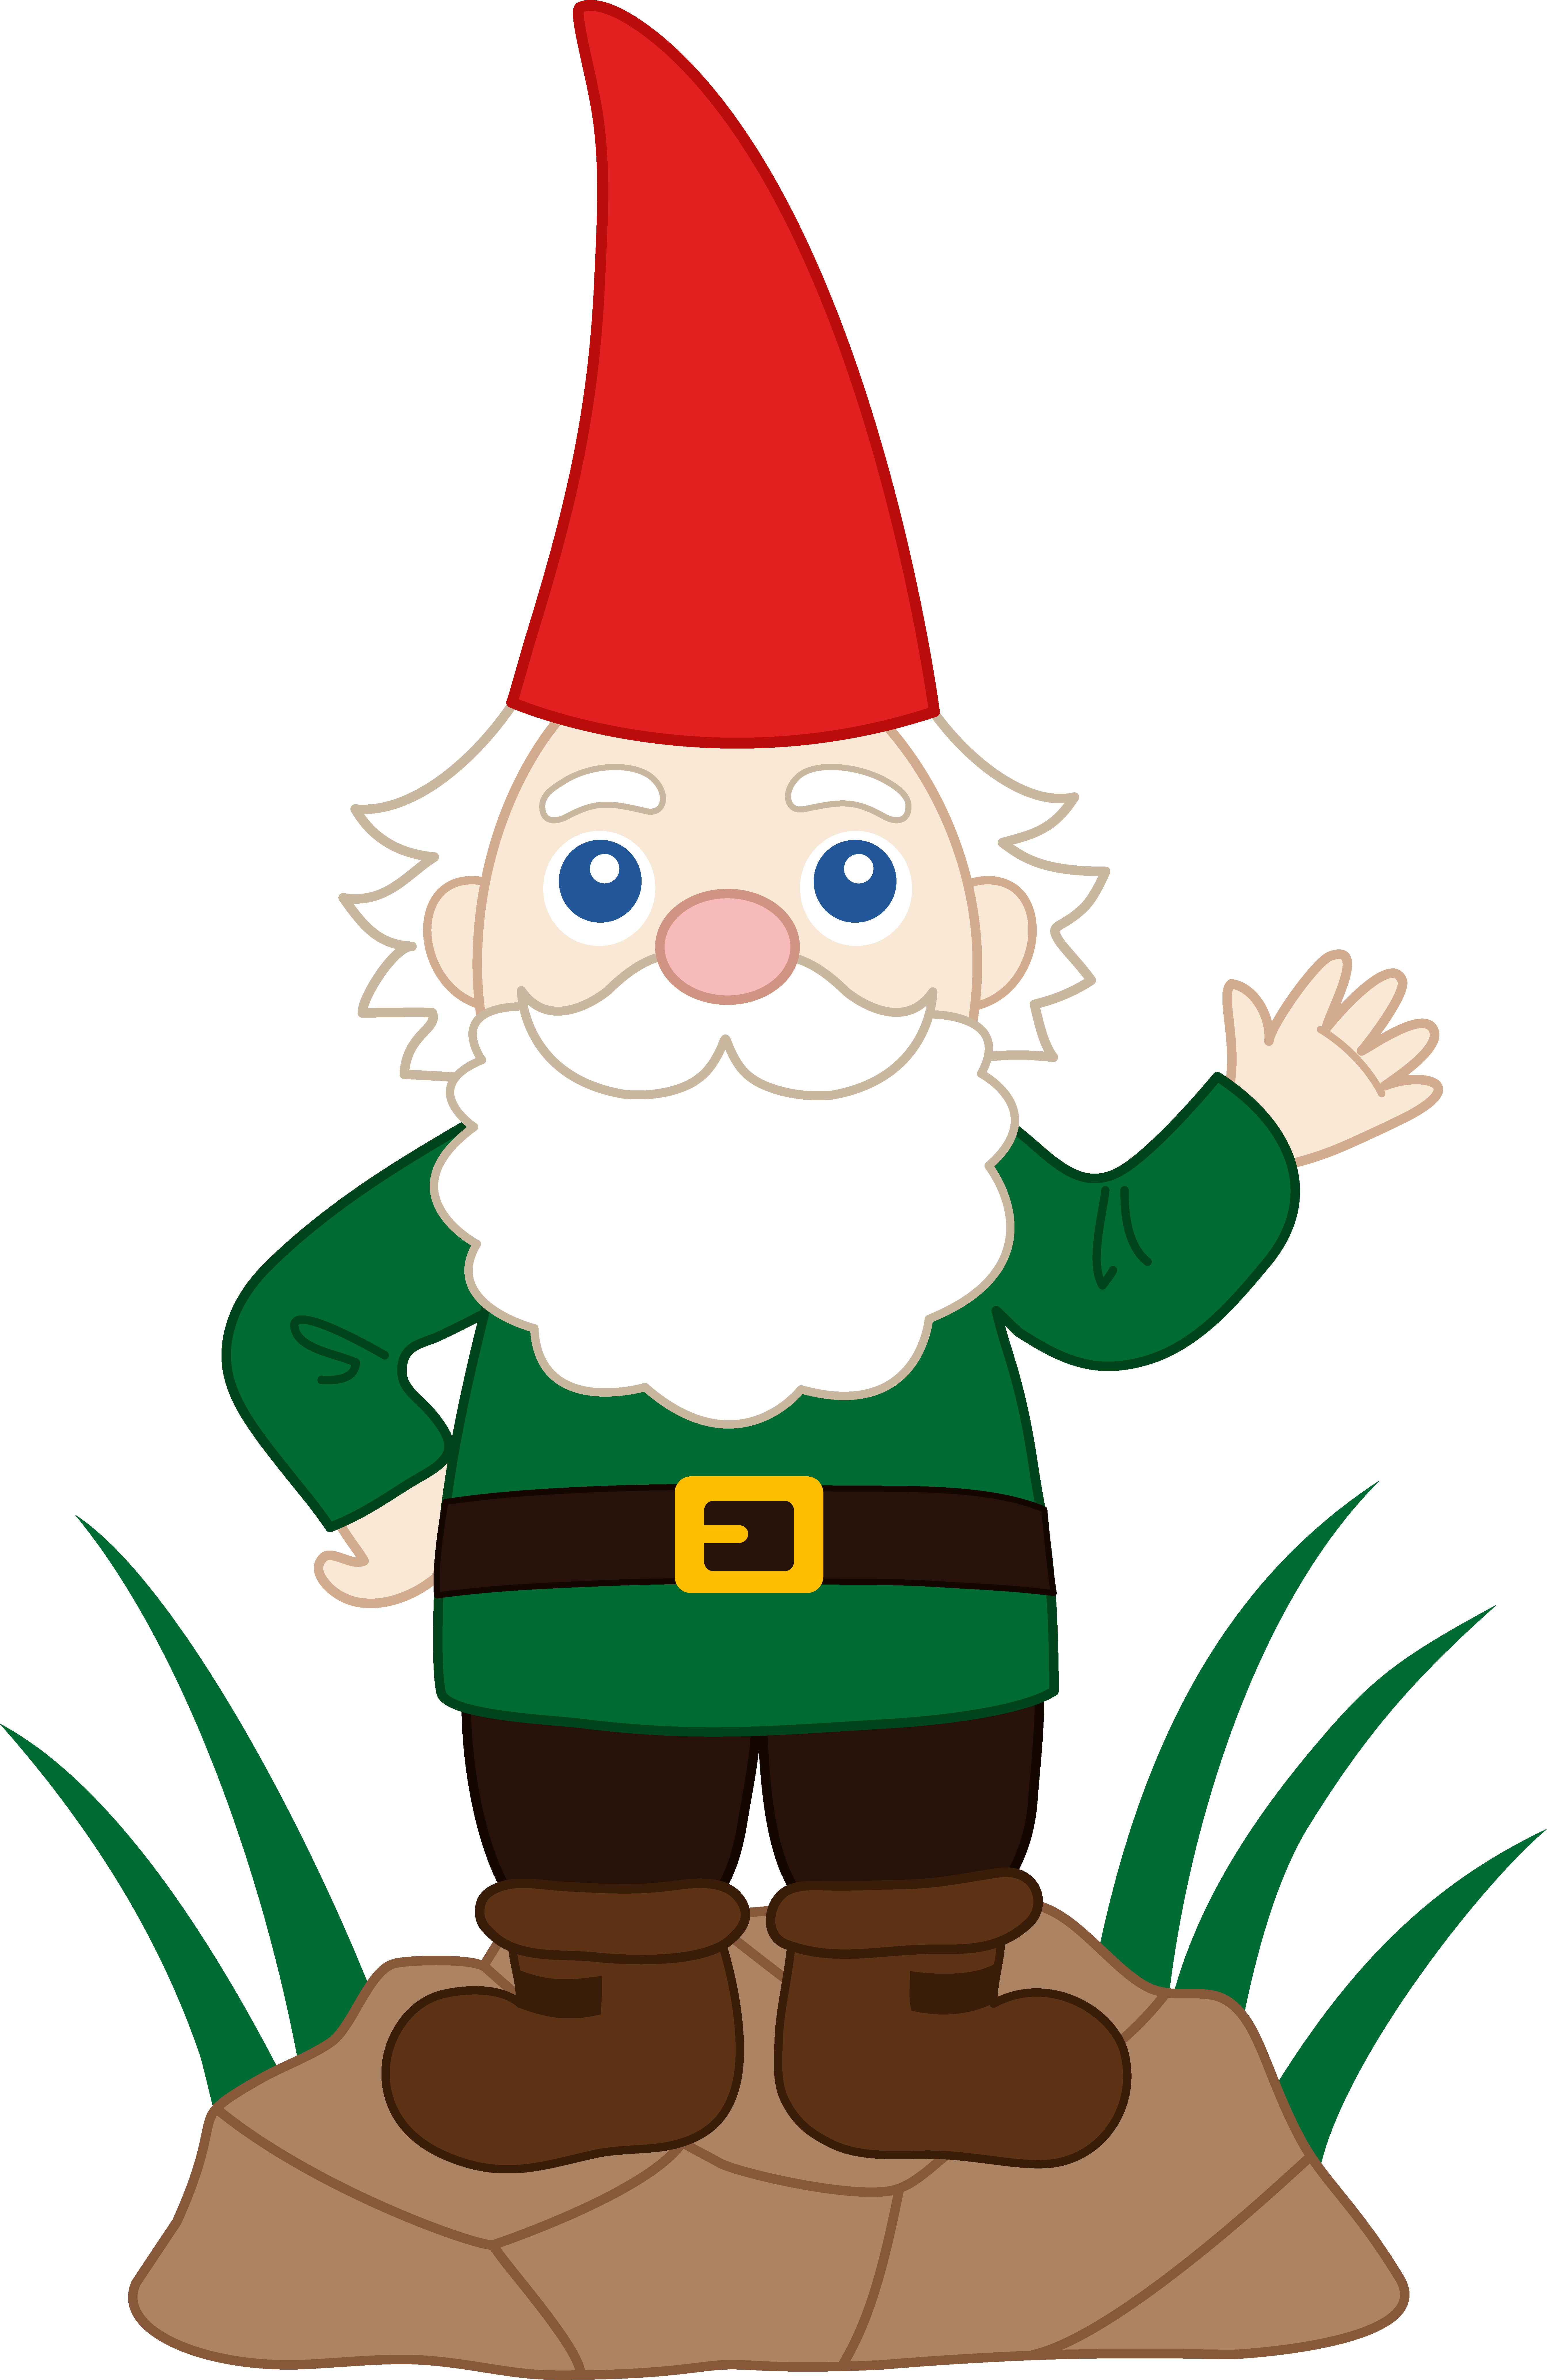 Gardening clipart animated. Gnome free 